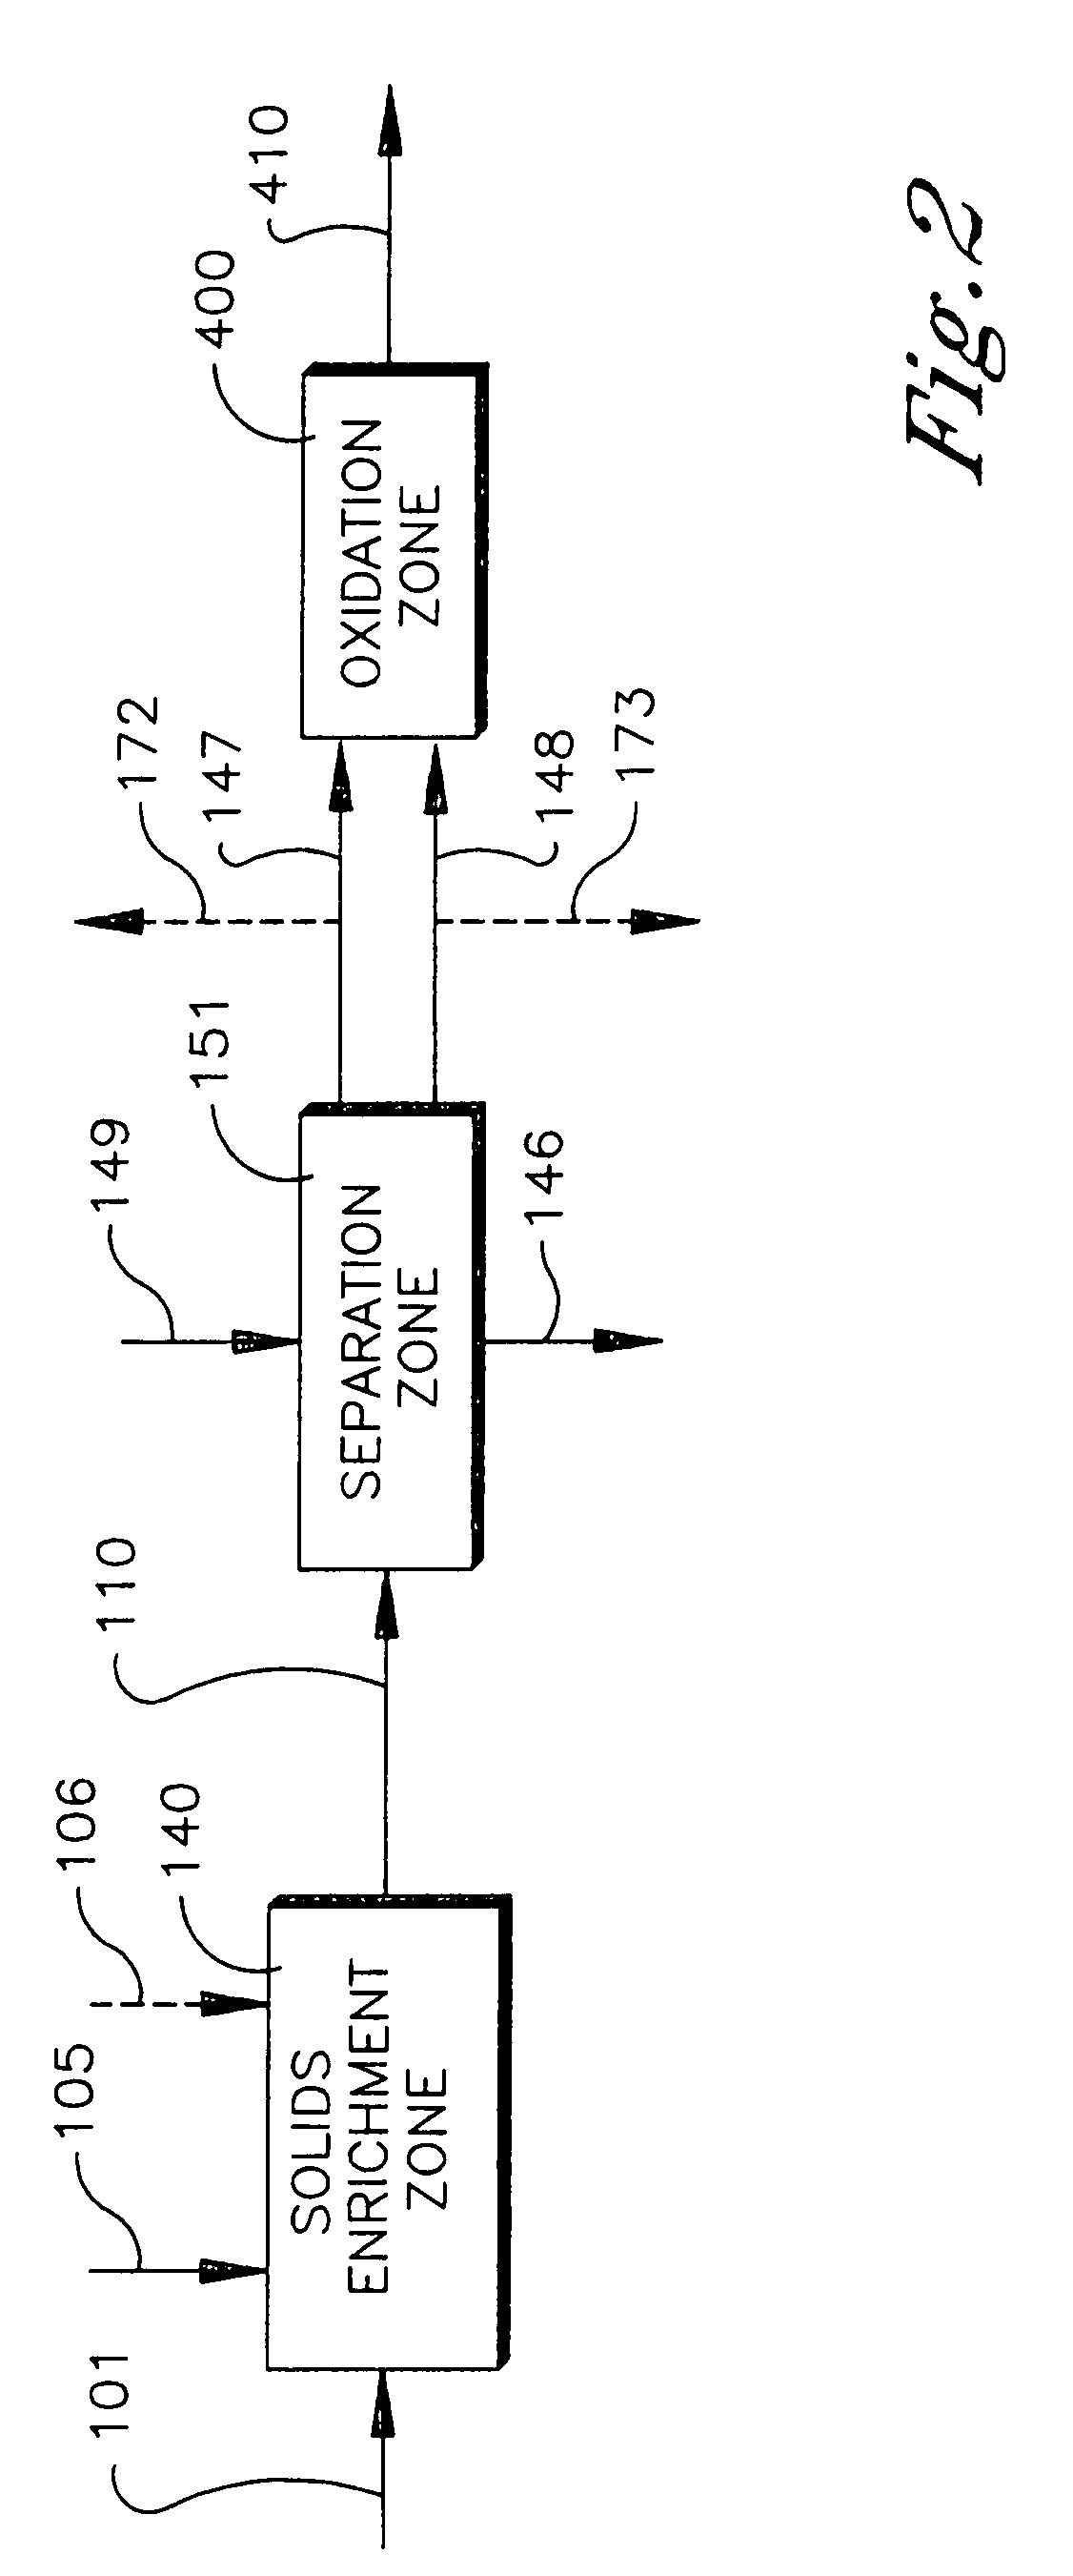 Process for removal of impurities from an oxidizer purge stream